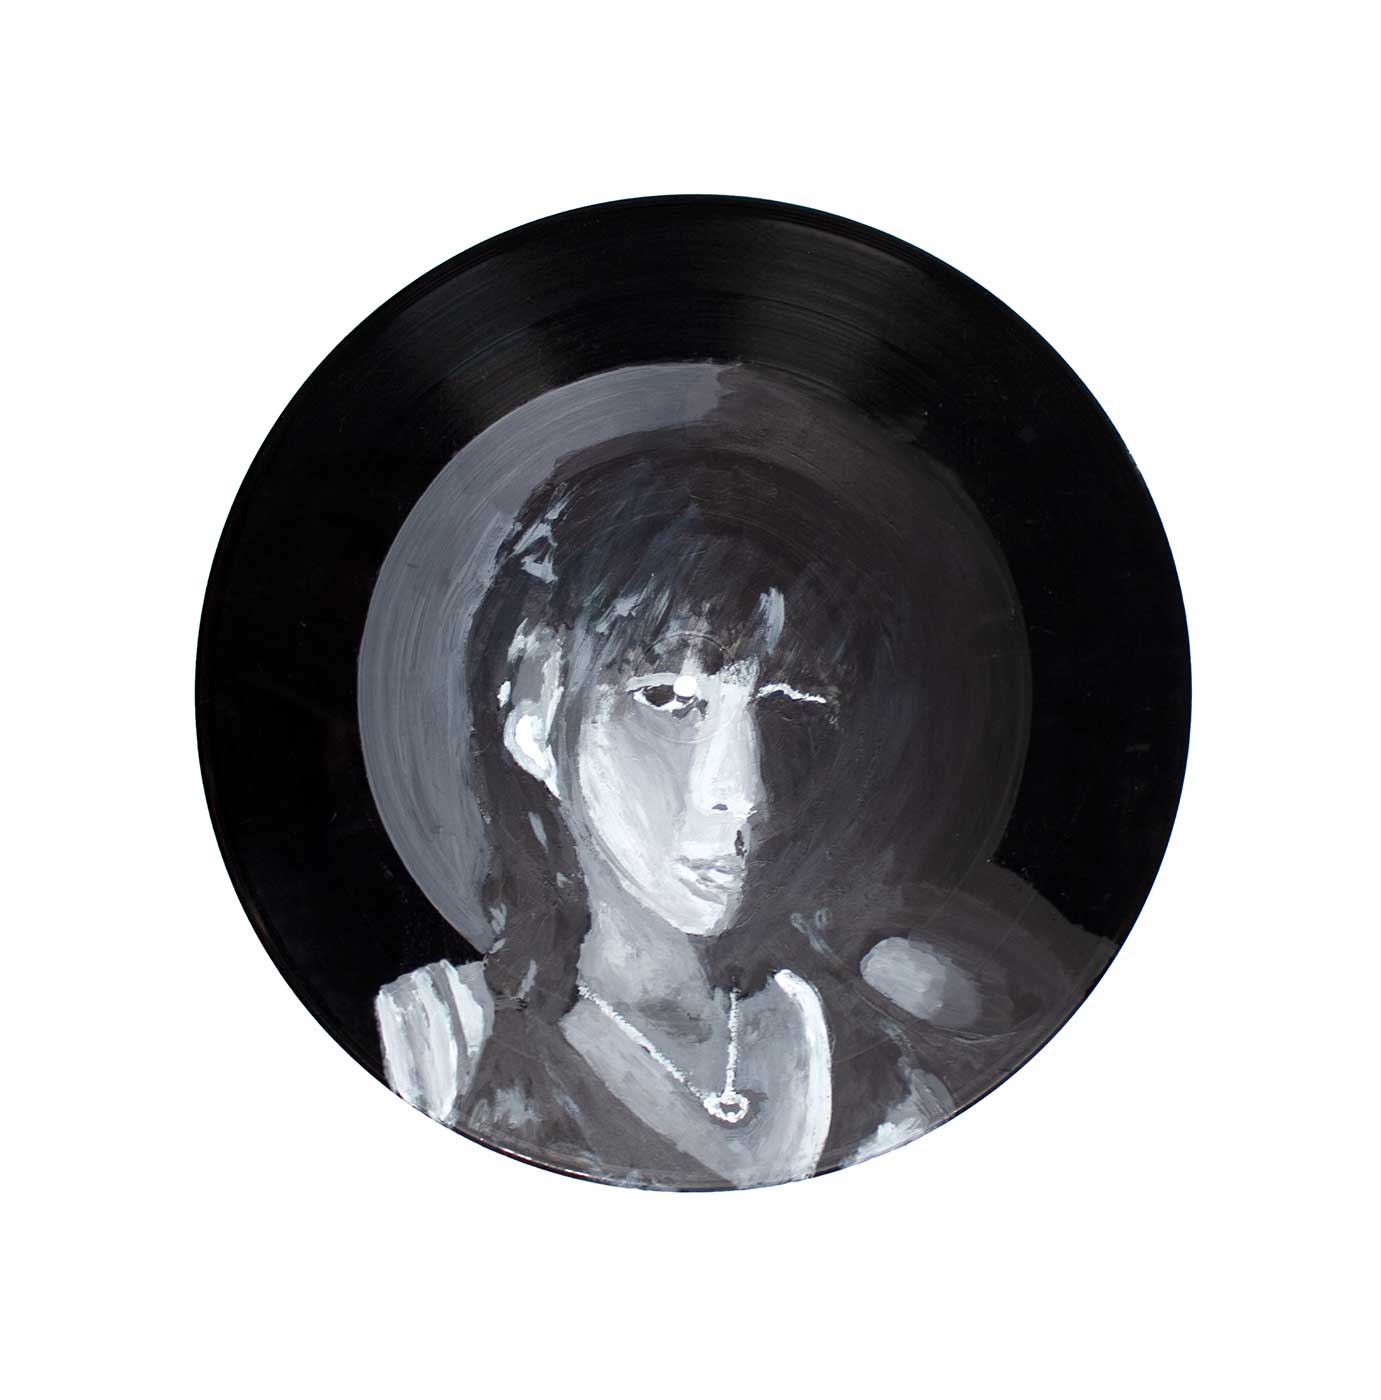 painting of a girl on a vinyl record.